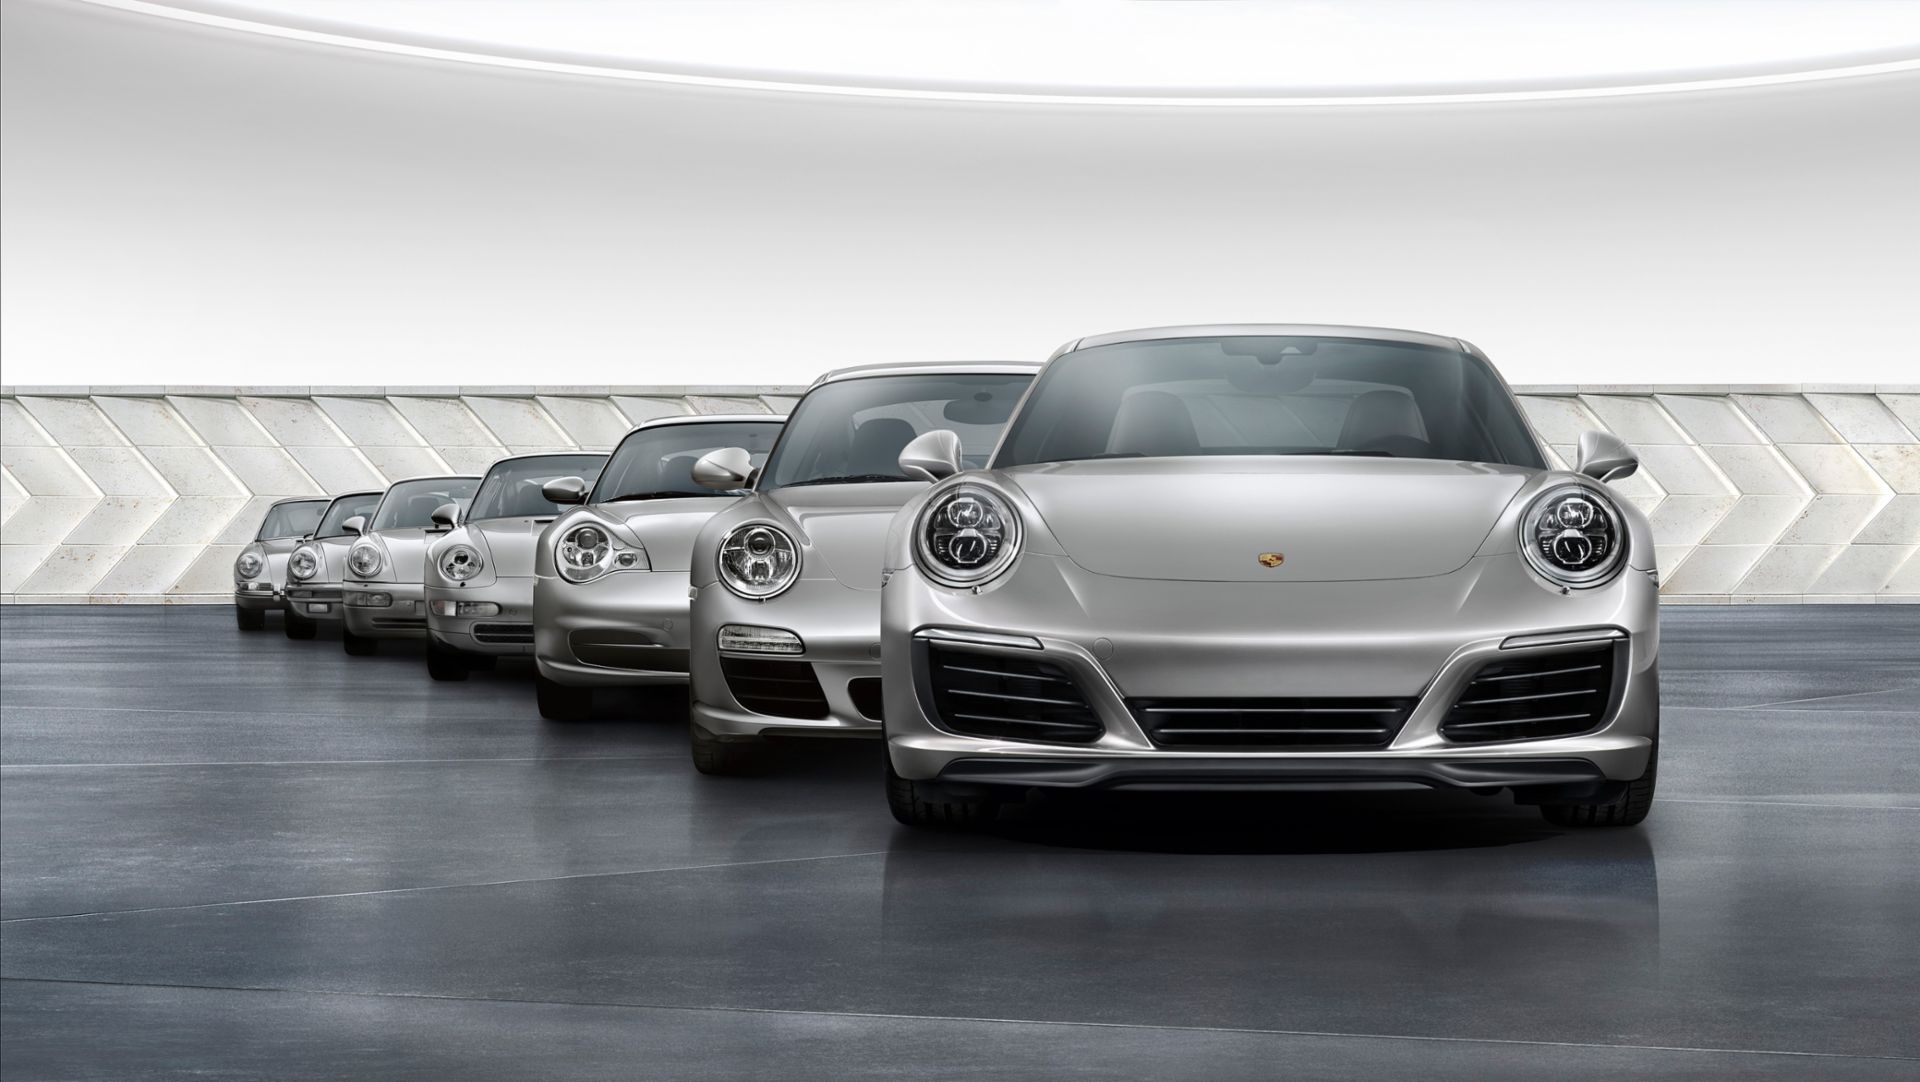 The Carrera name is these days synonymous with the 911 model range